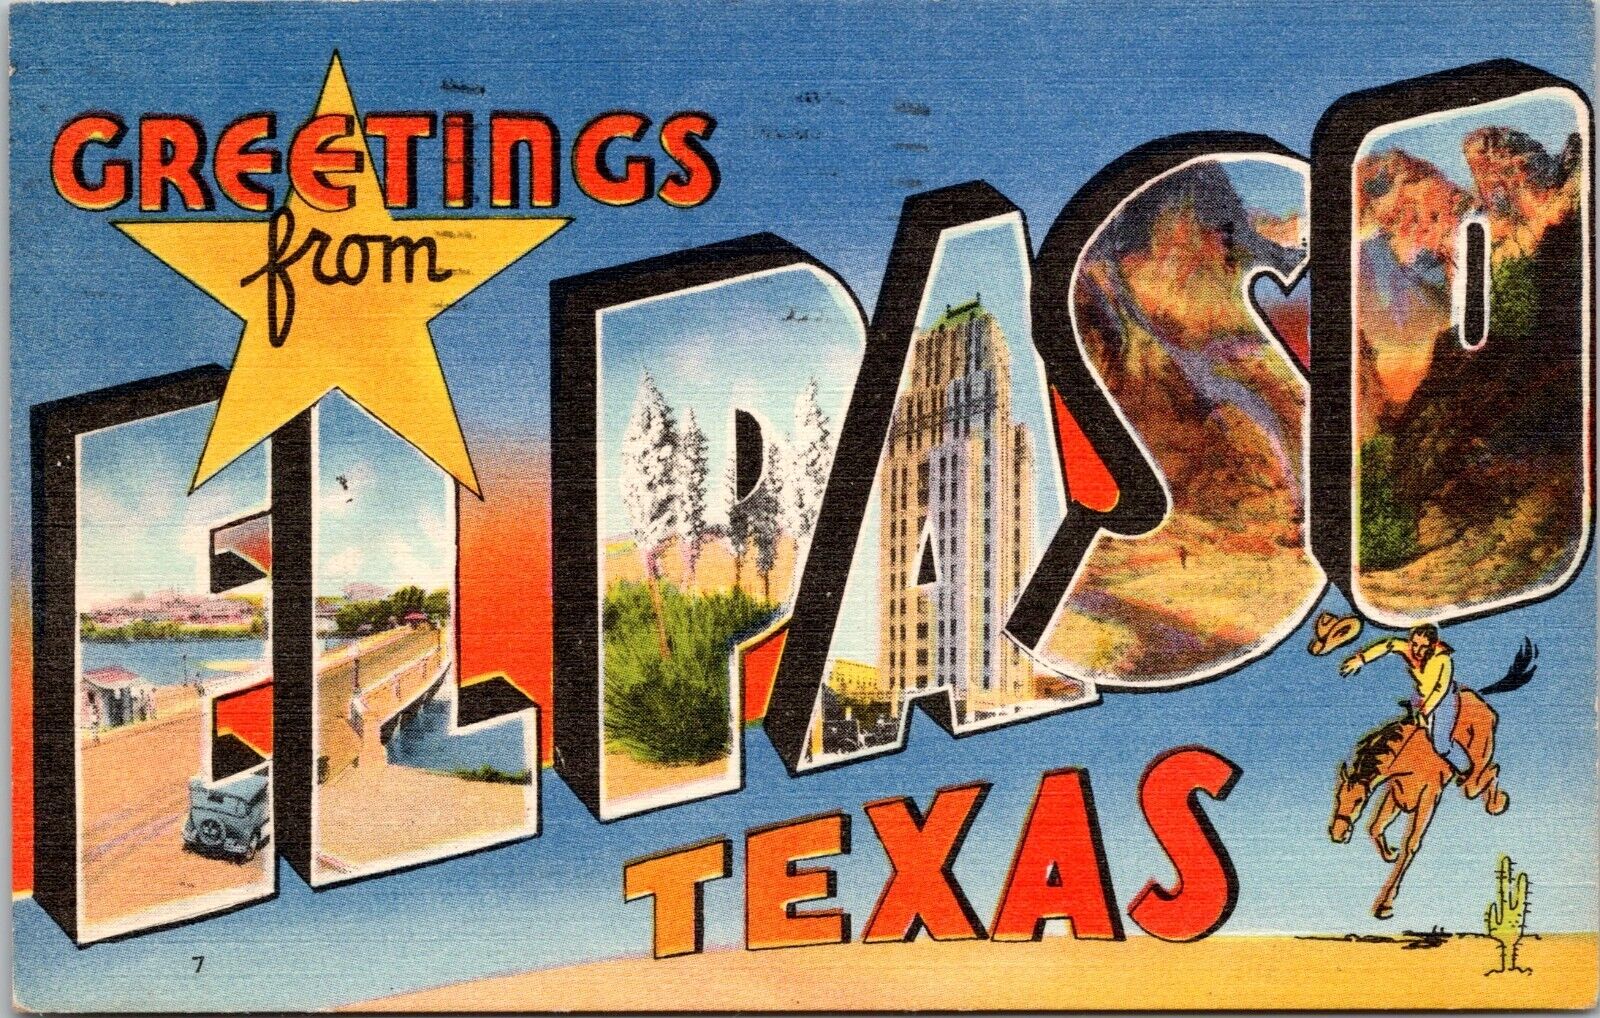 Large Letter Greetings from El Paso, Texas- 1956 Posted Linen Postcard